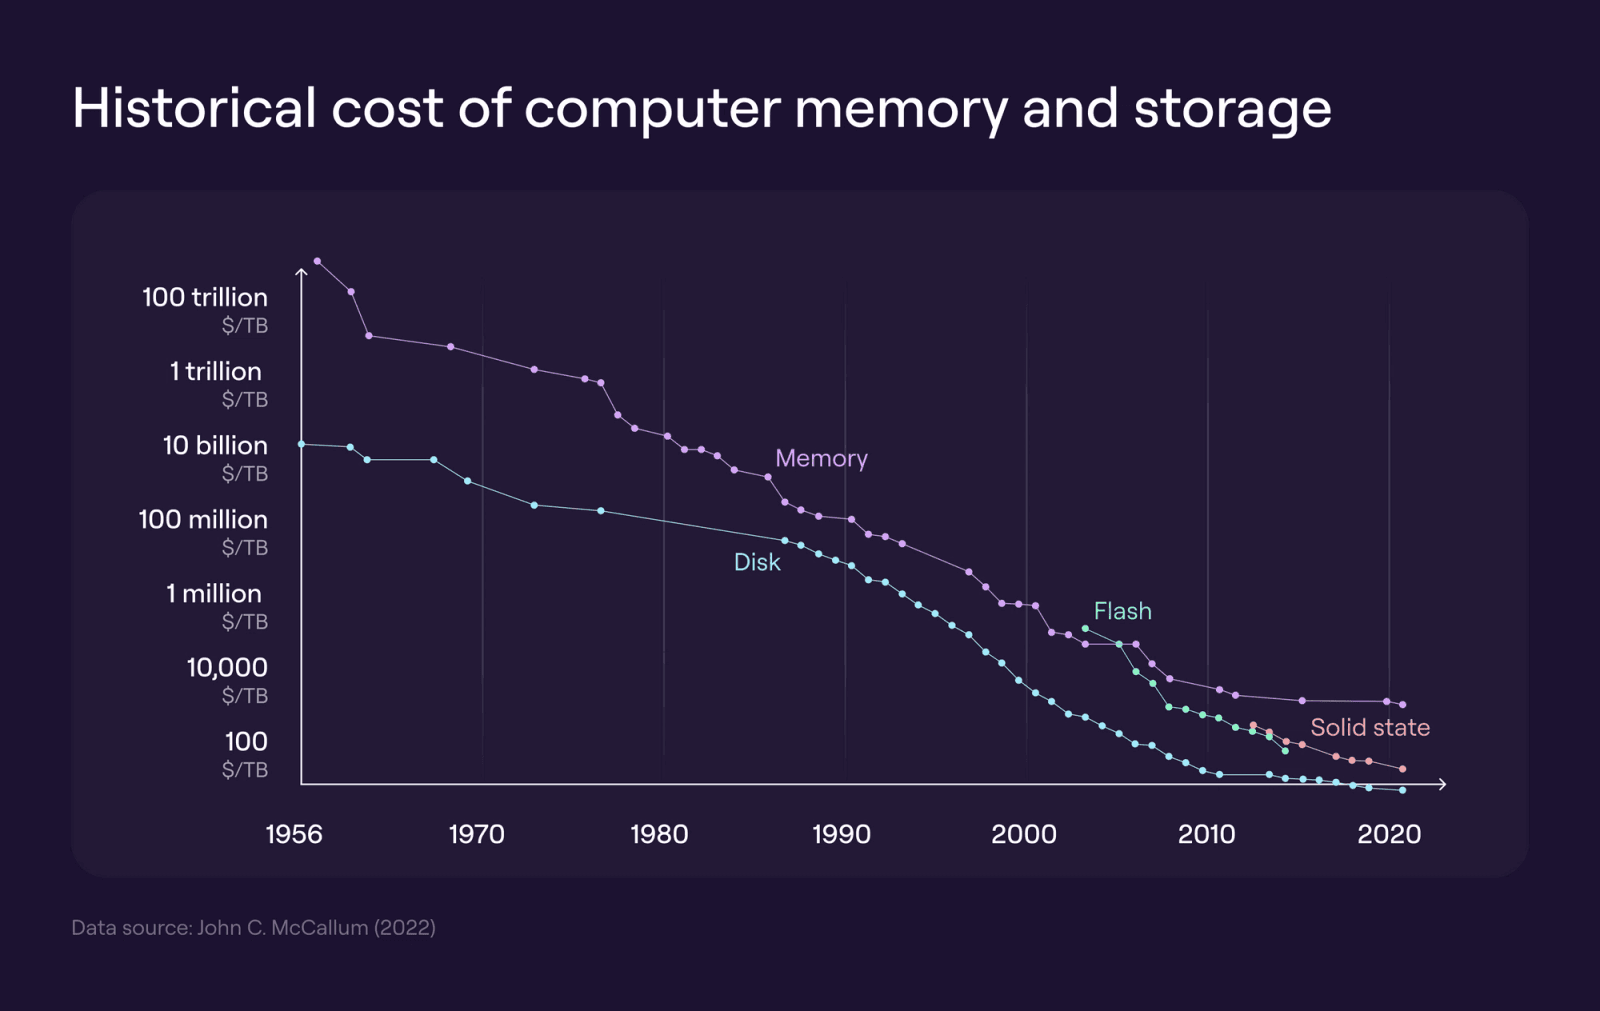 Historical cost of computer memory and storage